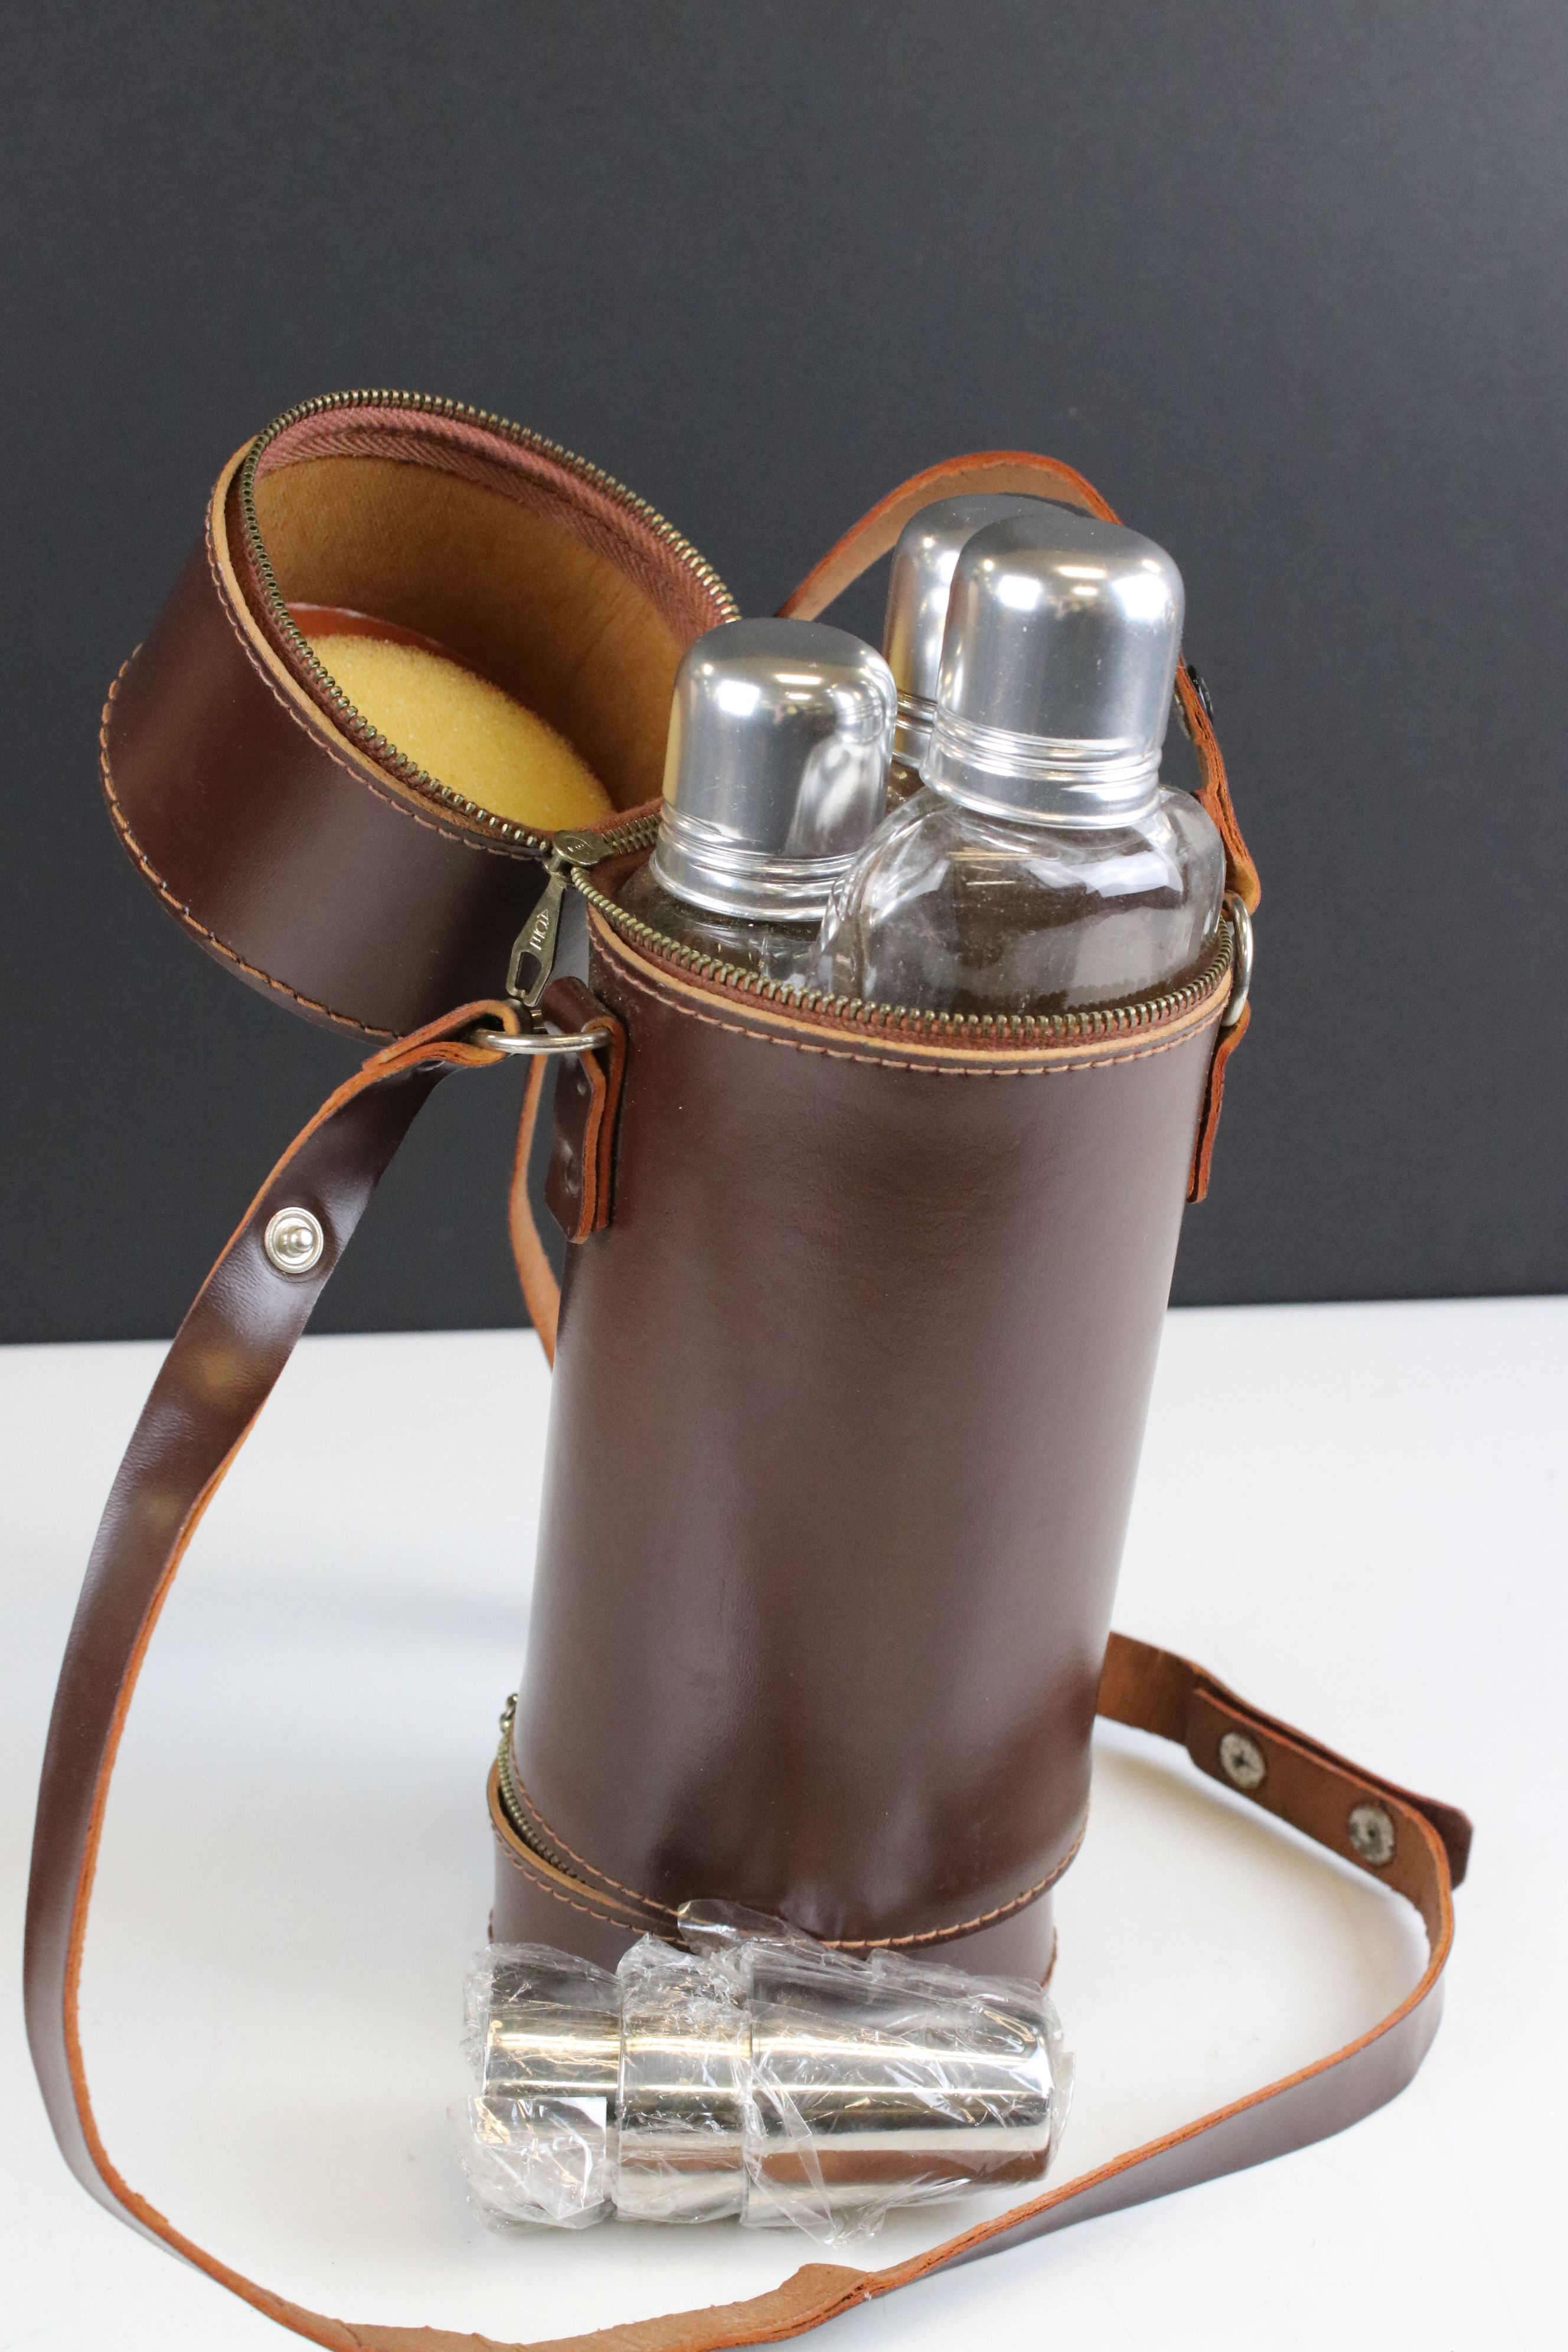 Leather cased triple spirit flask, set with three cups in separate compartments - Image 2 of 10